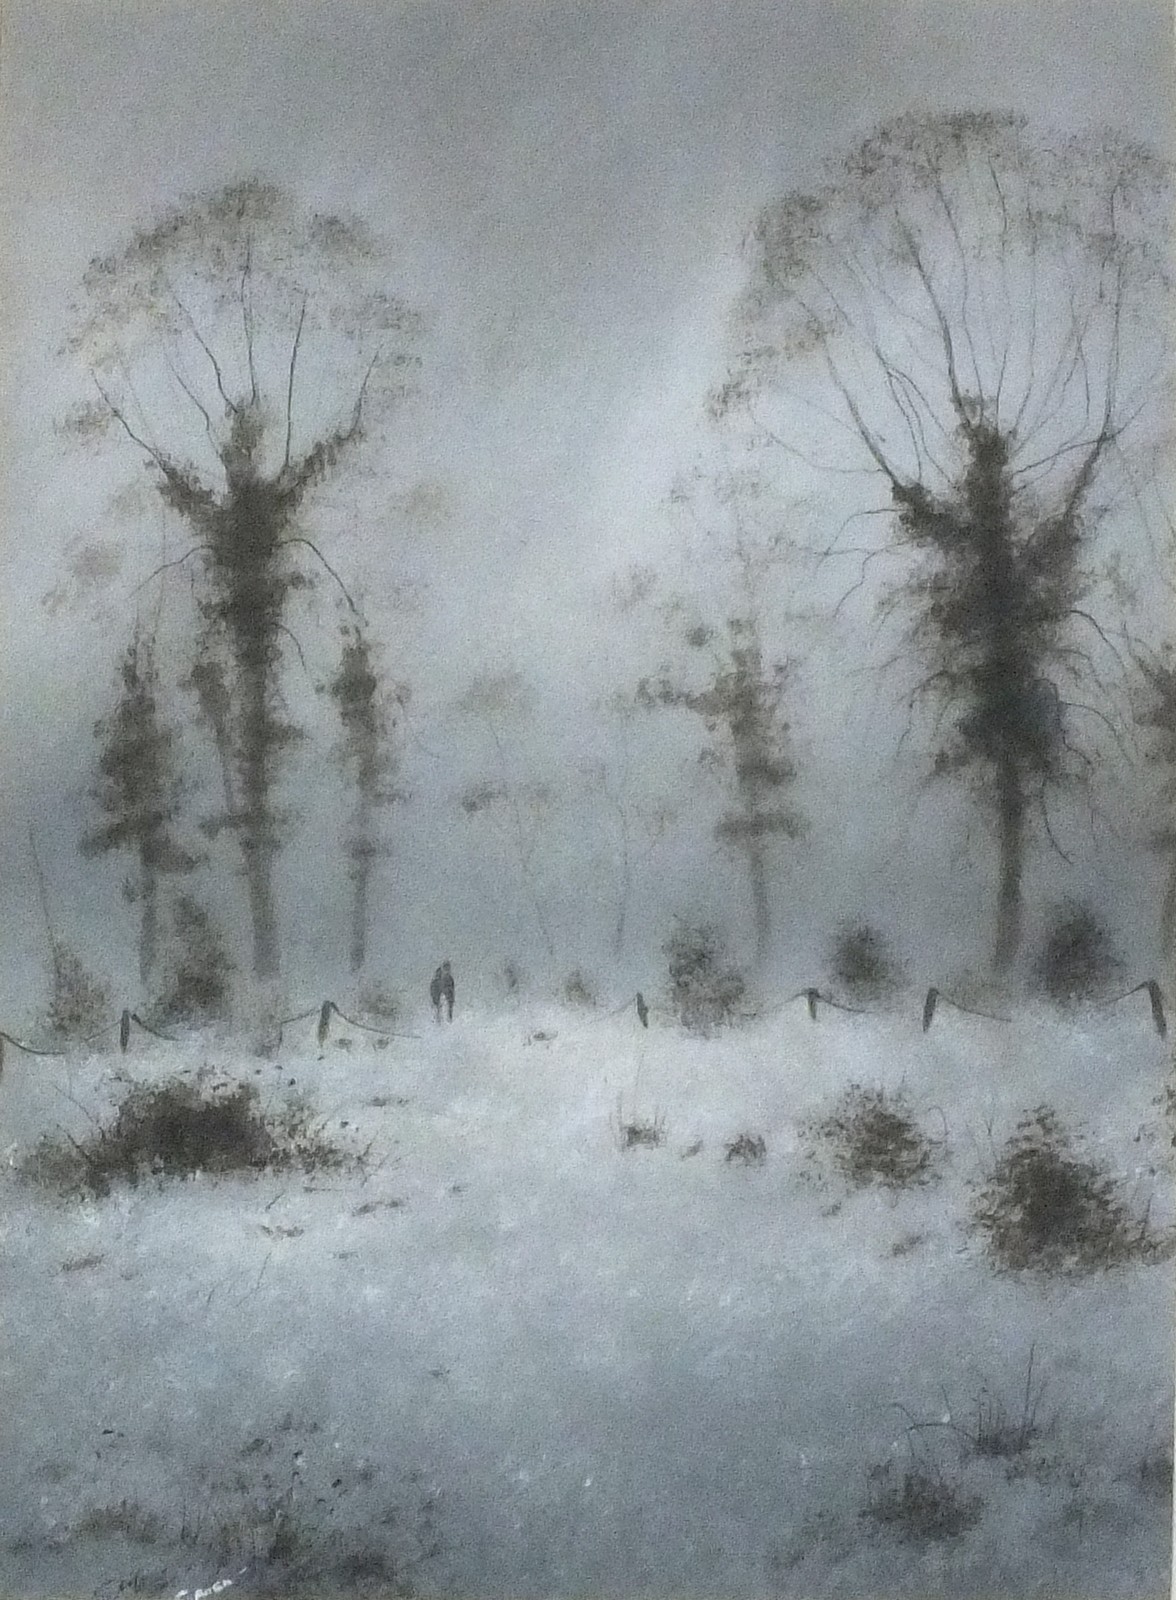 S ALLEN (20th Century) Frosty Encounter, Gouache, Signed lower left, titled verso, 10.75" x 7.5" (